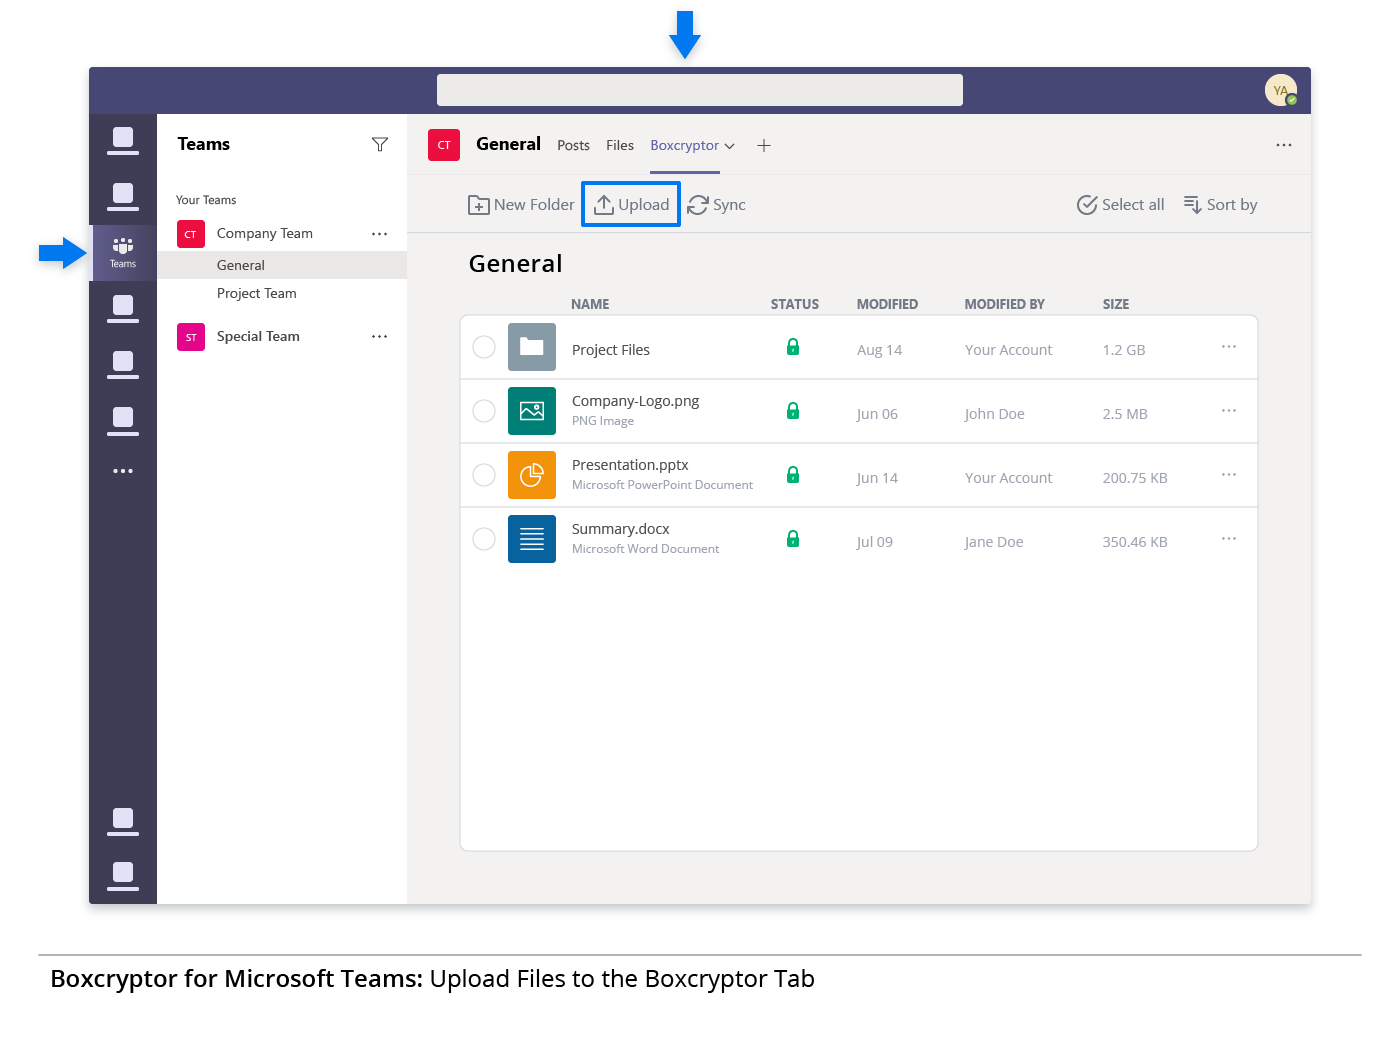 Screenshot of Microsoft Teams with an arrow pointing at the Upload function.